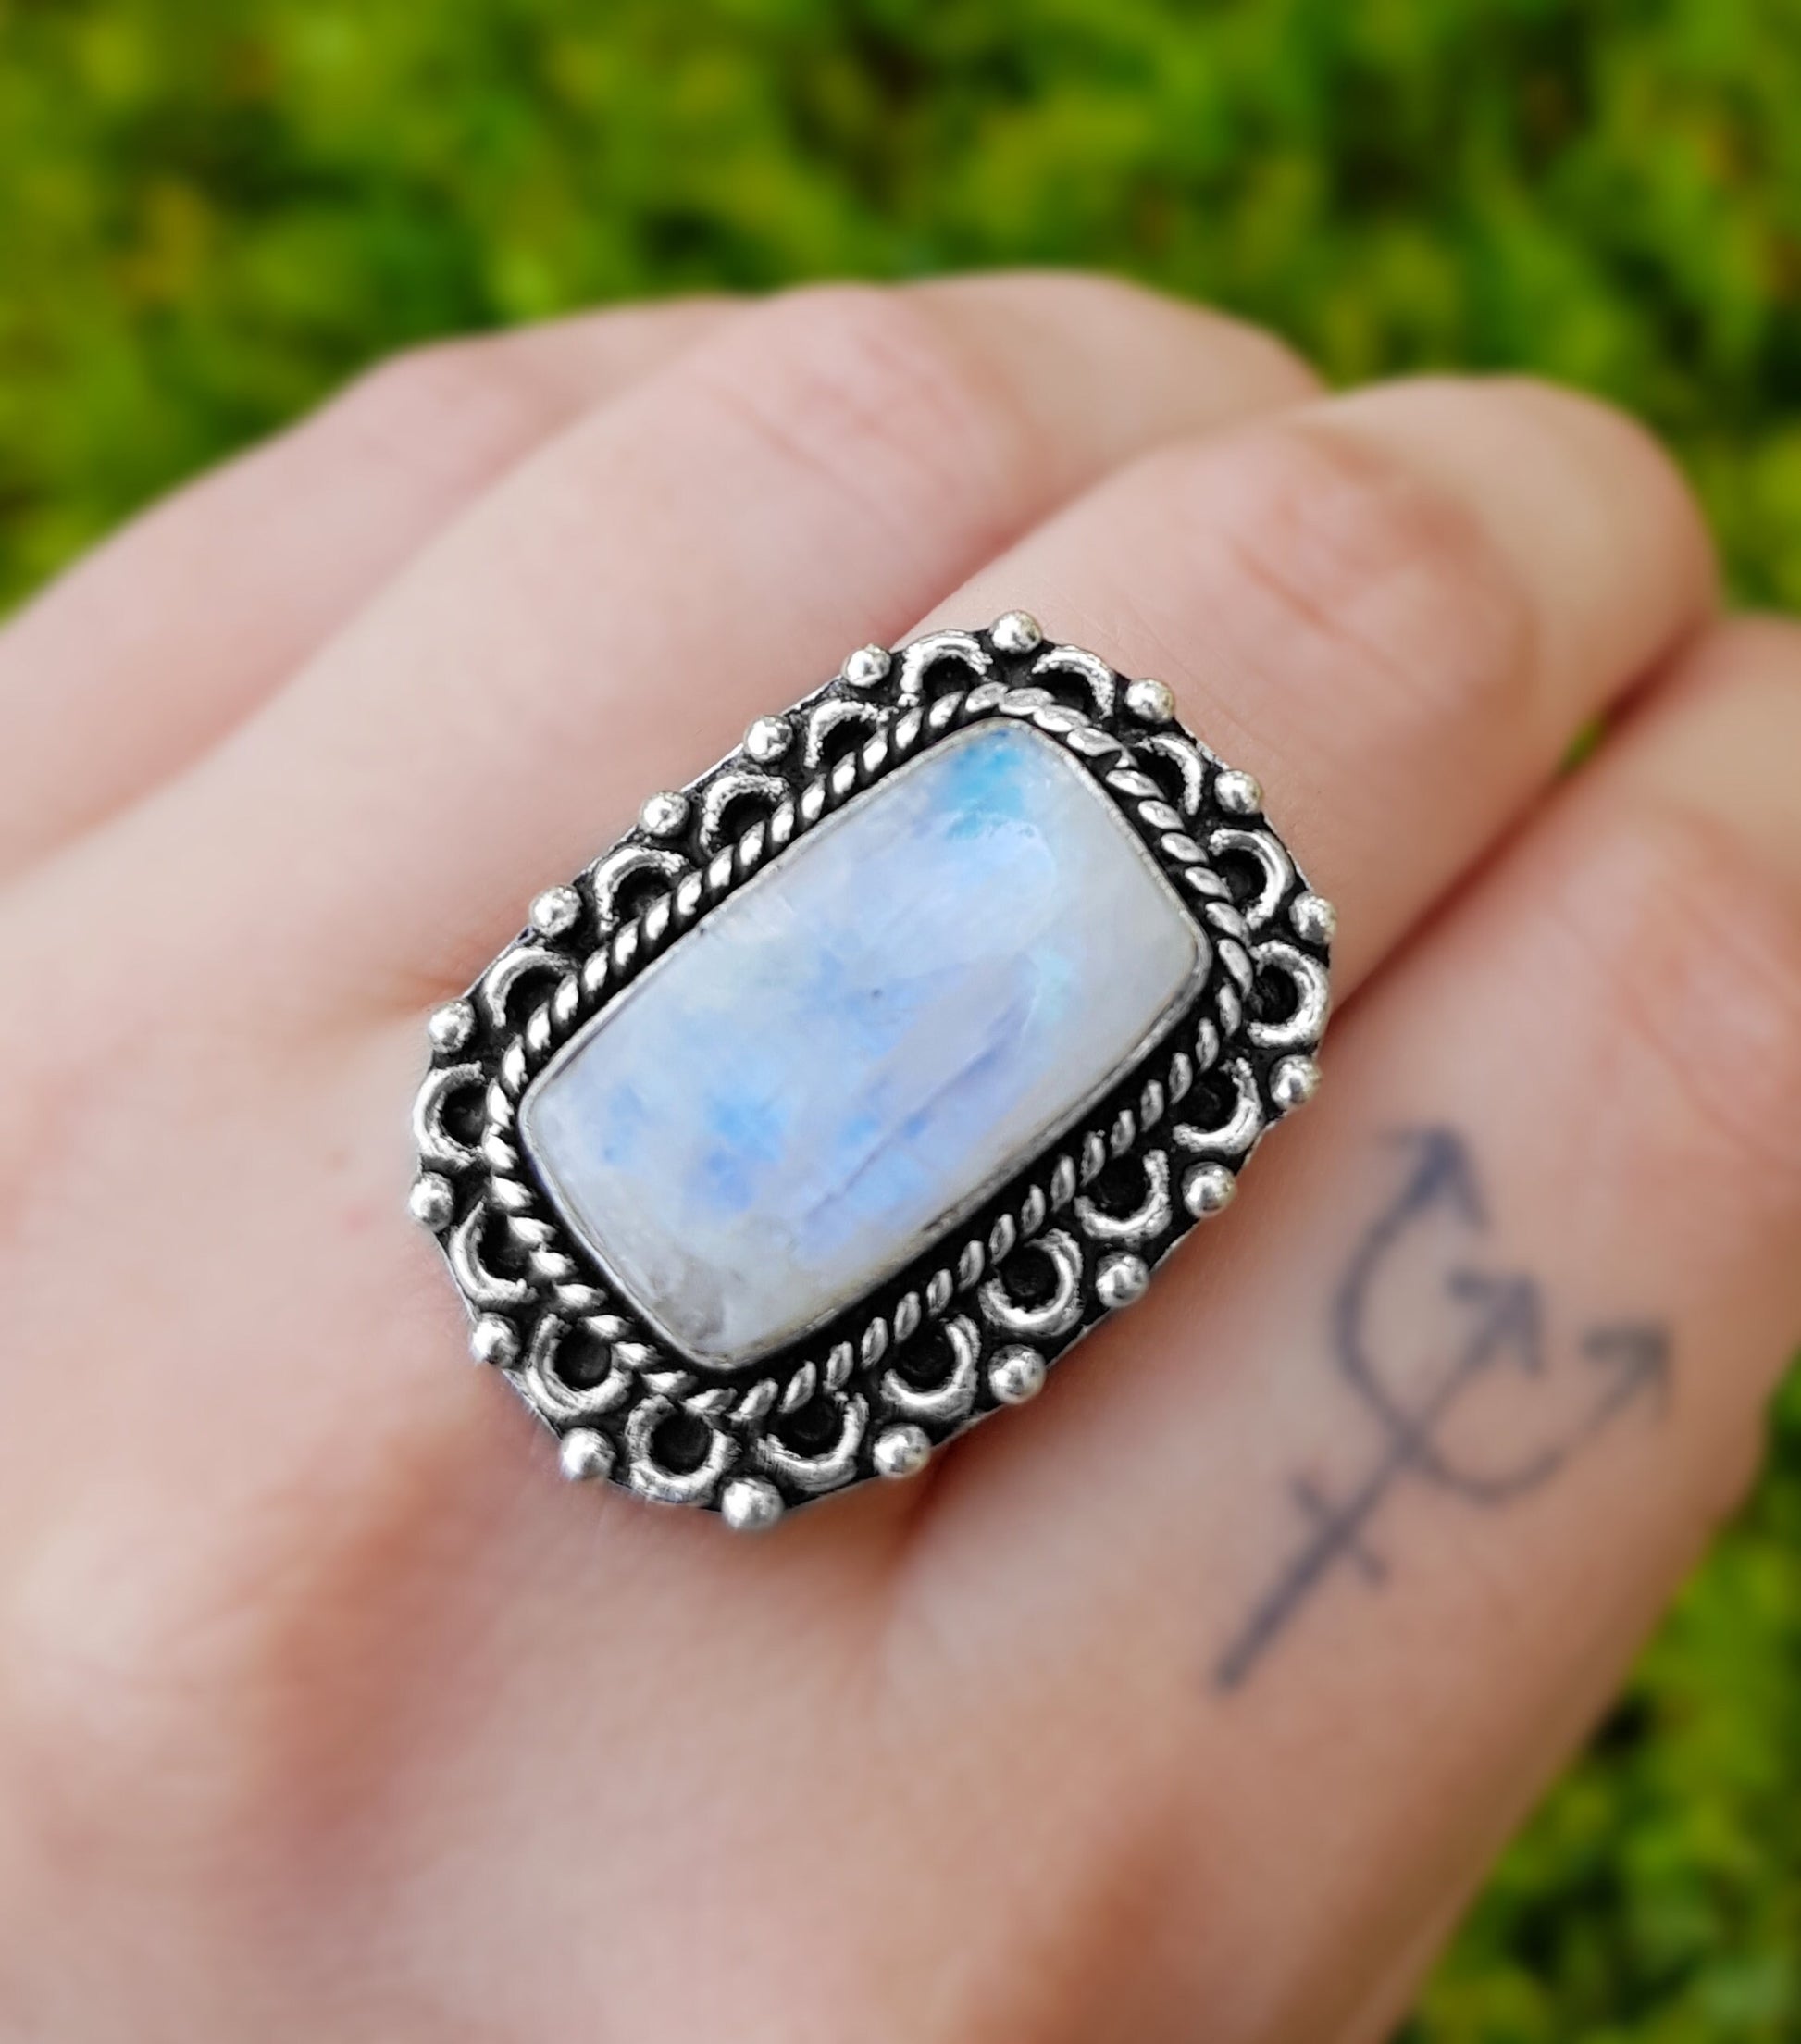 Rainbow Moonstone Statement Ring Sterling Silver Boho Rings Size US 7 1/2 Unique Jewelry One Of A Kind Gift GypsyJewelry